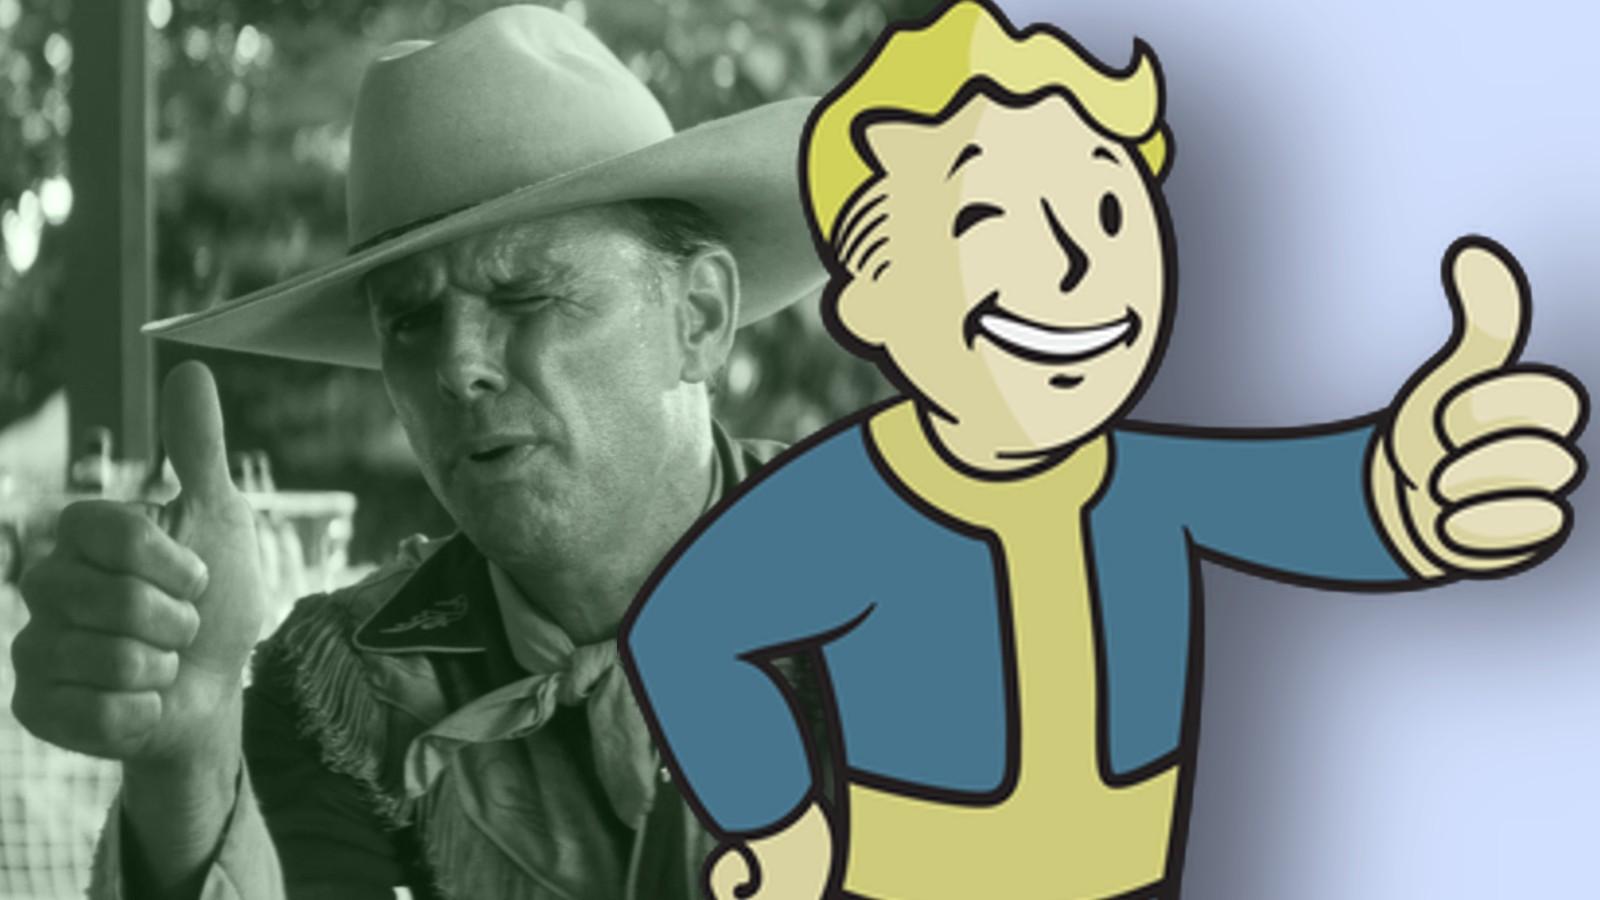 Walton Goggins in the Fallout TV show and Vault Boy